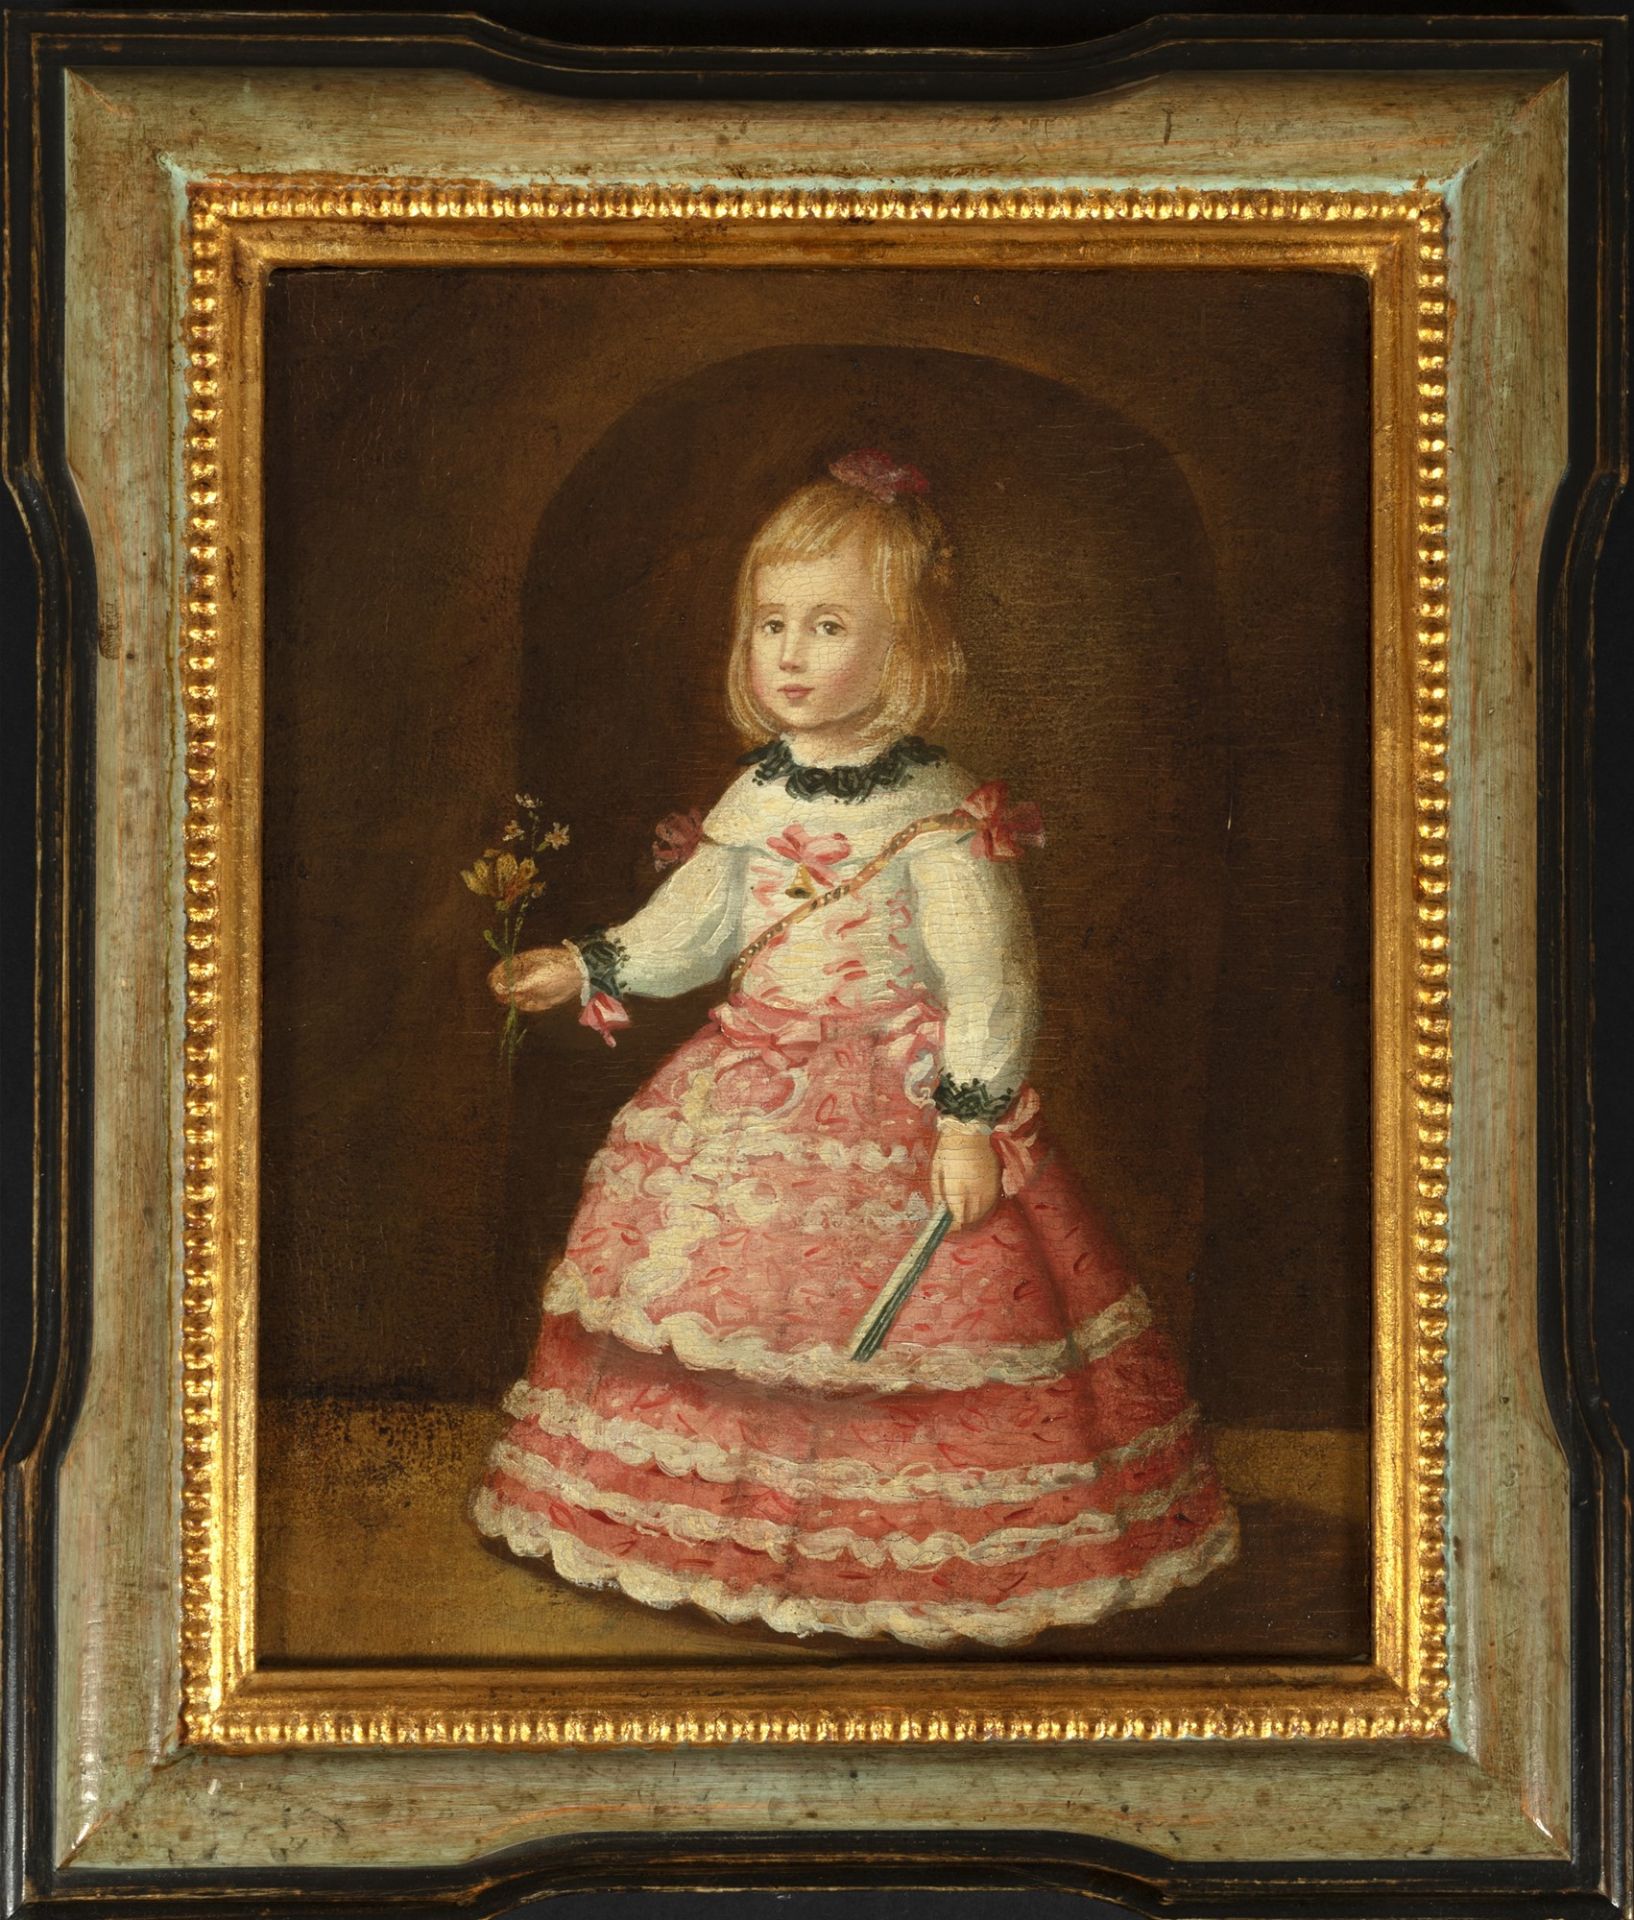 Maniera di Velazquez - Portrait of little girl in pink dress and flowers in her hand